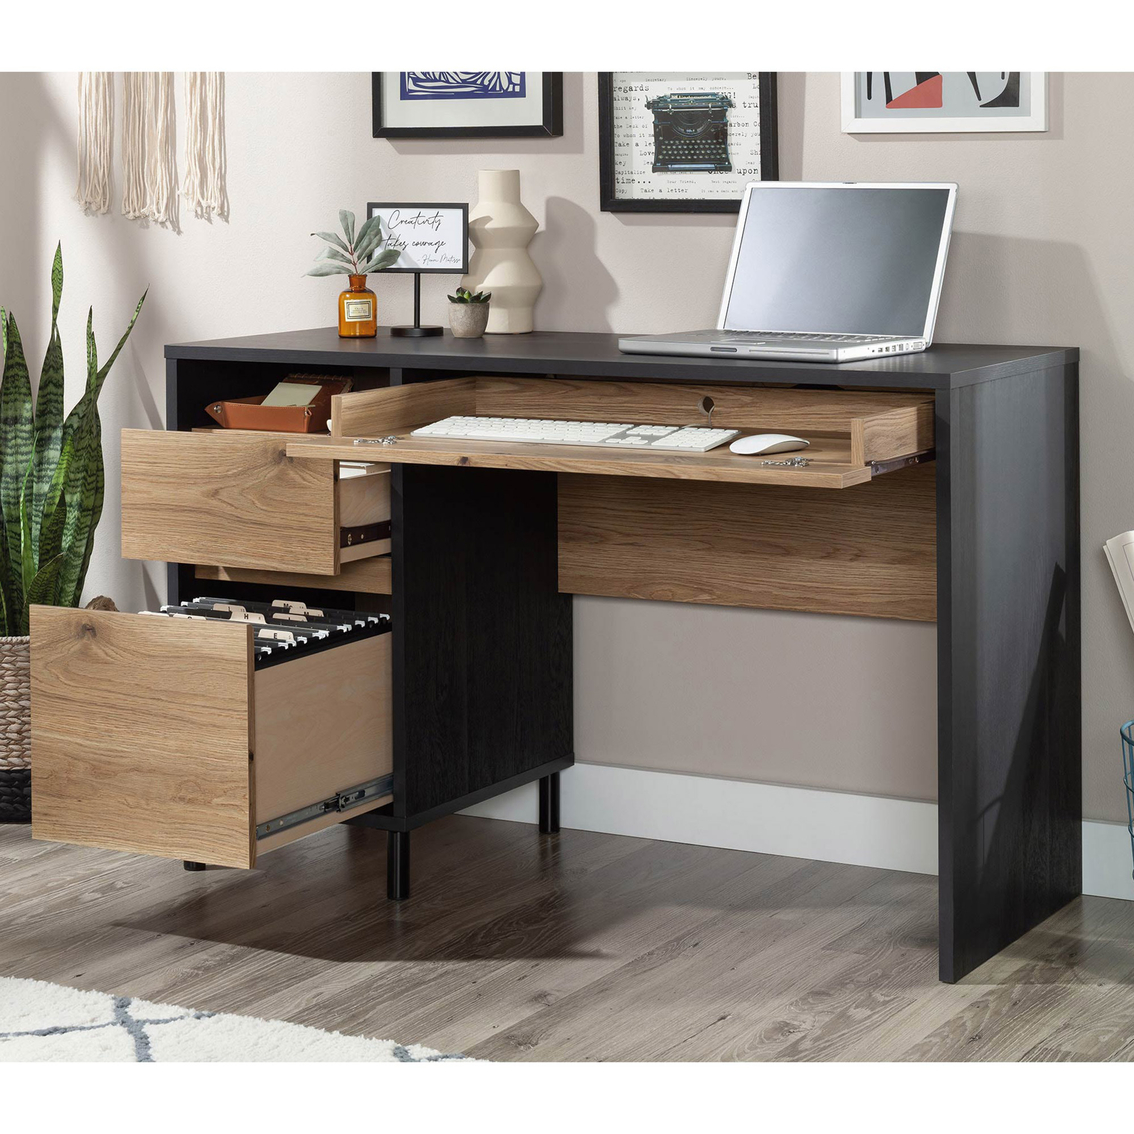 Sauder Acadia Way Home Office Computer Desk with Shelf and Storage - Image 2 of 10